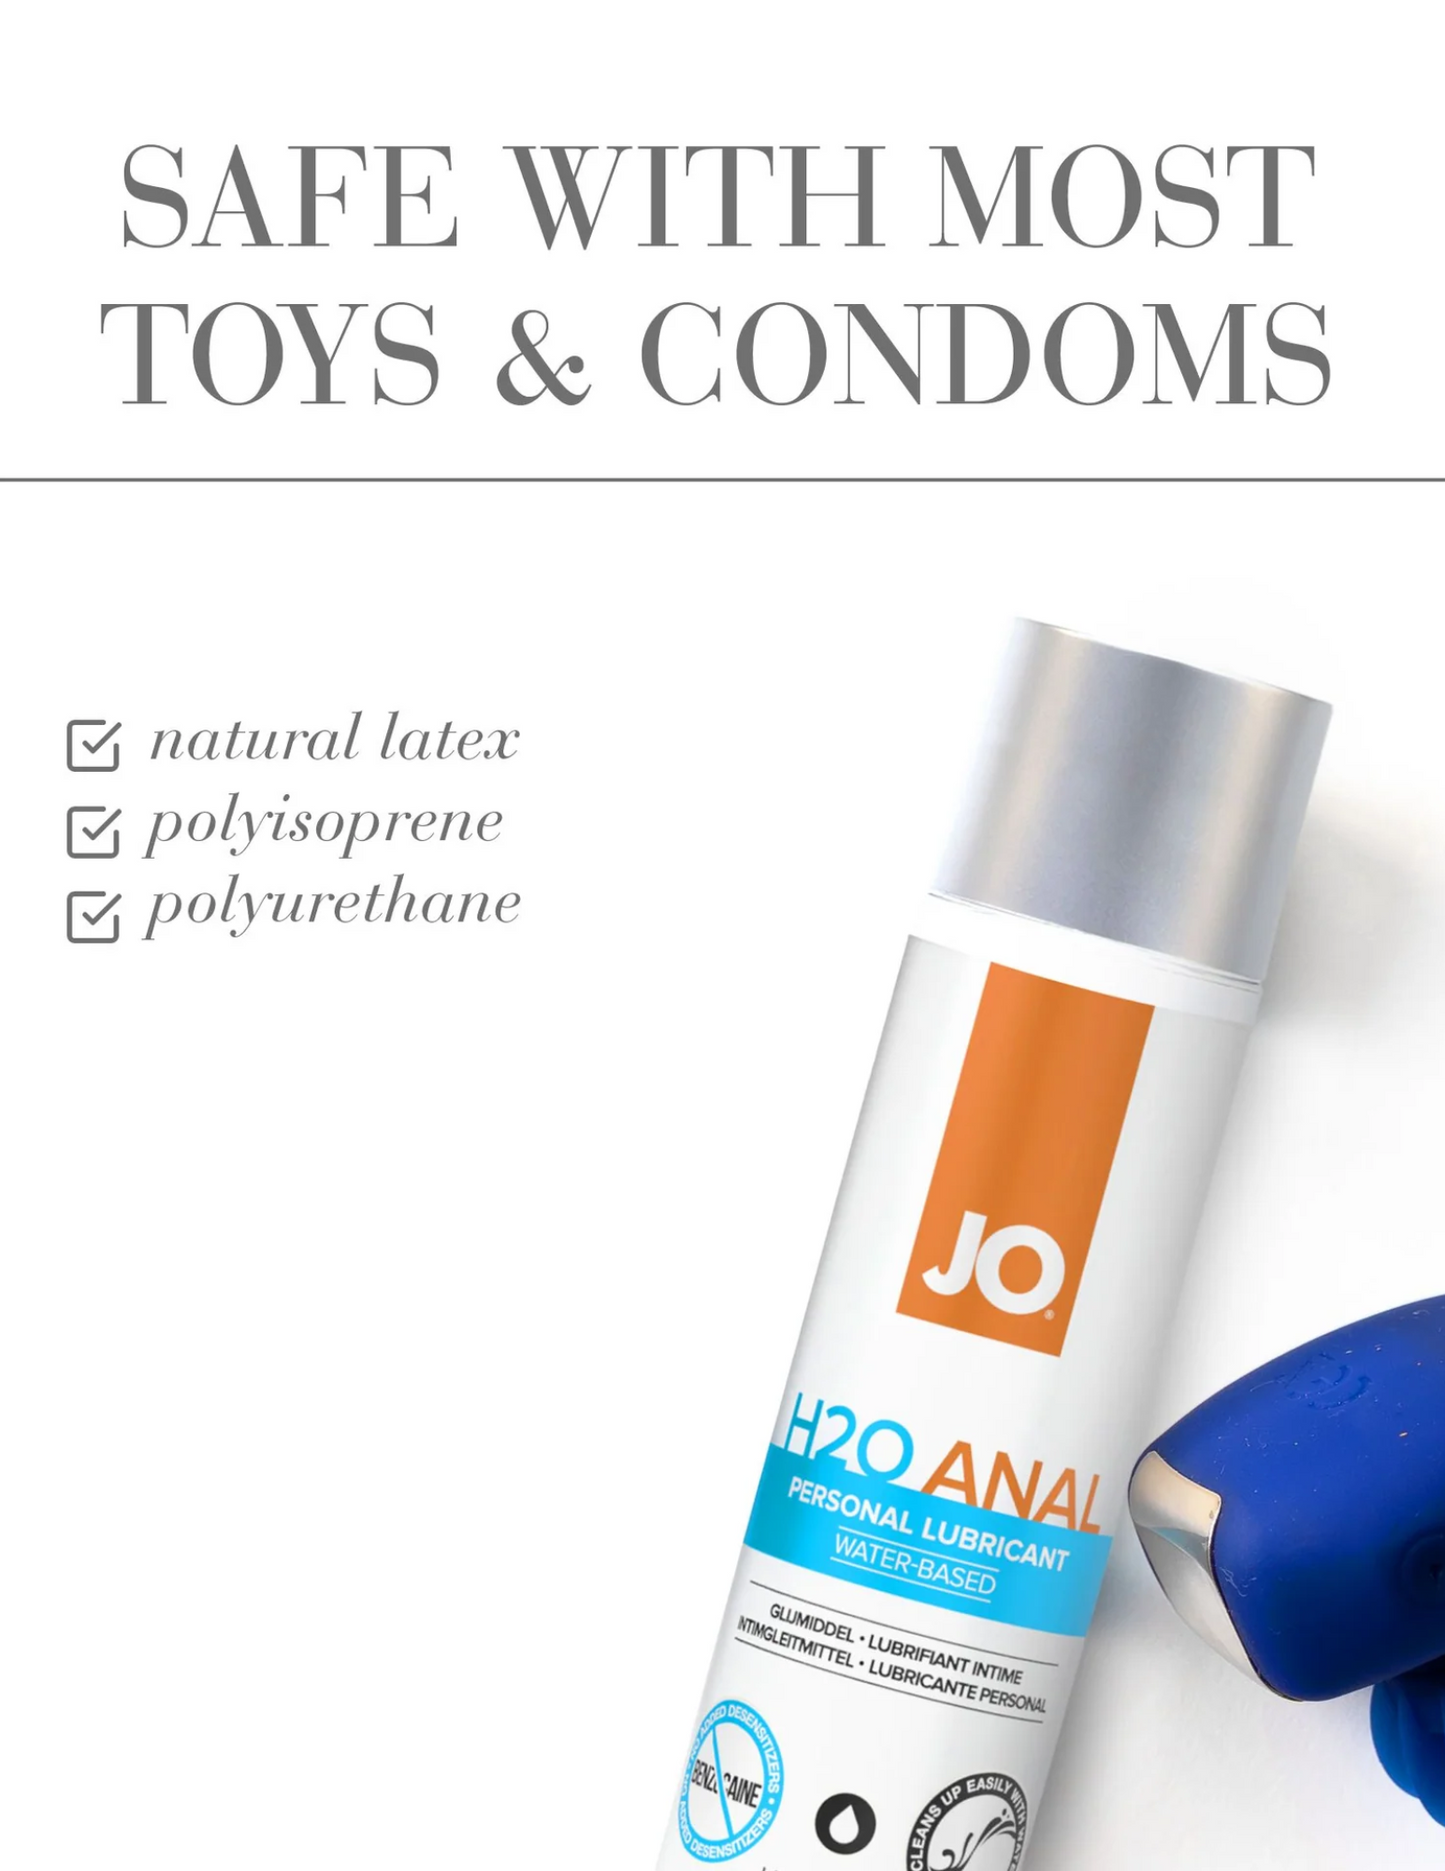 Ad highlighting the safety of System JO H2O Anal Water- Based Lubricant.